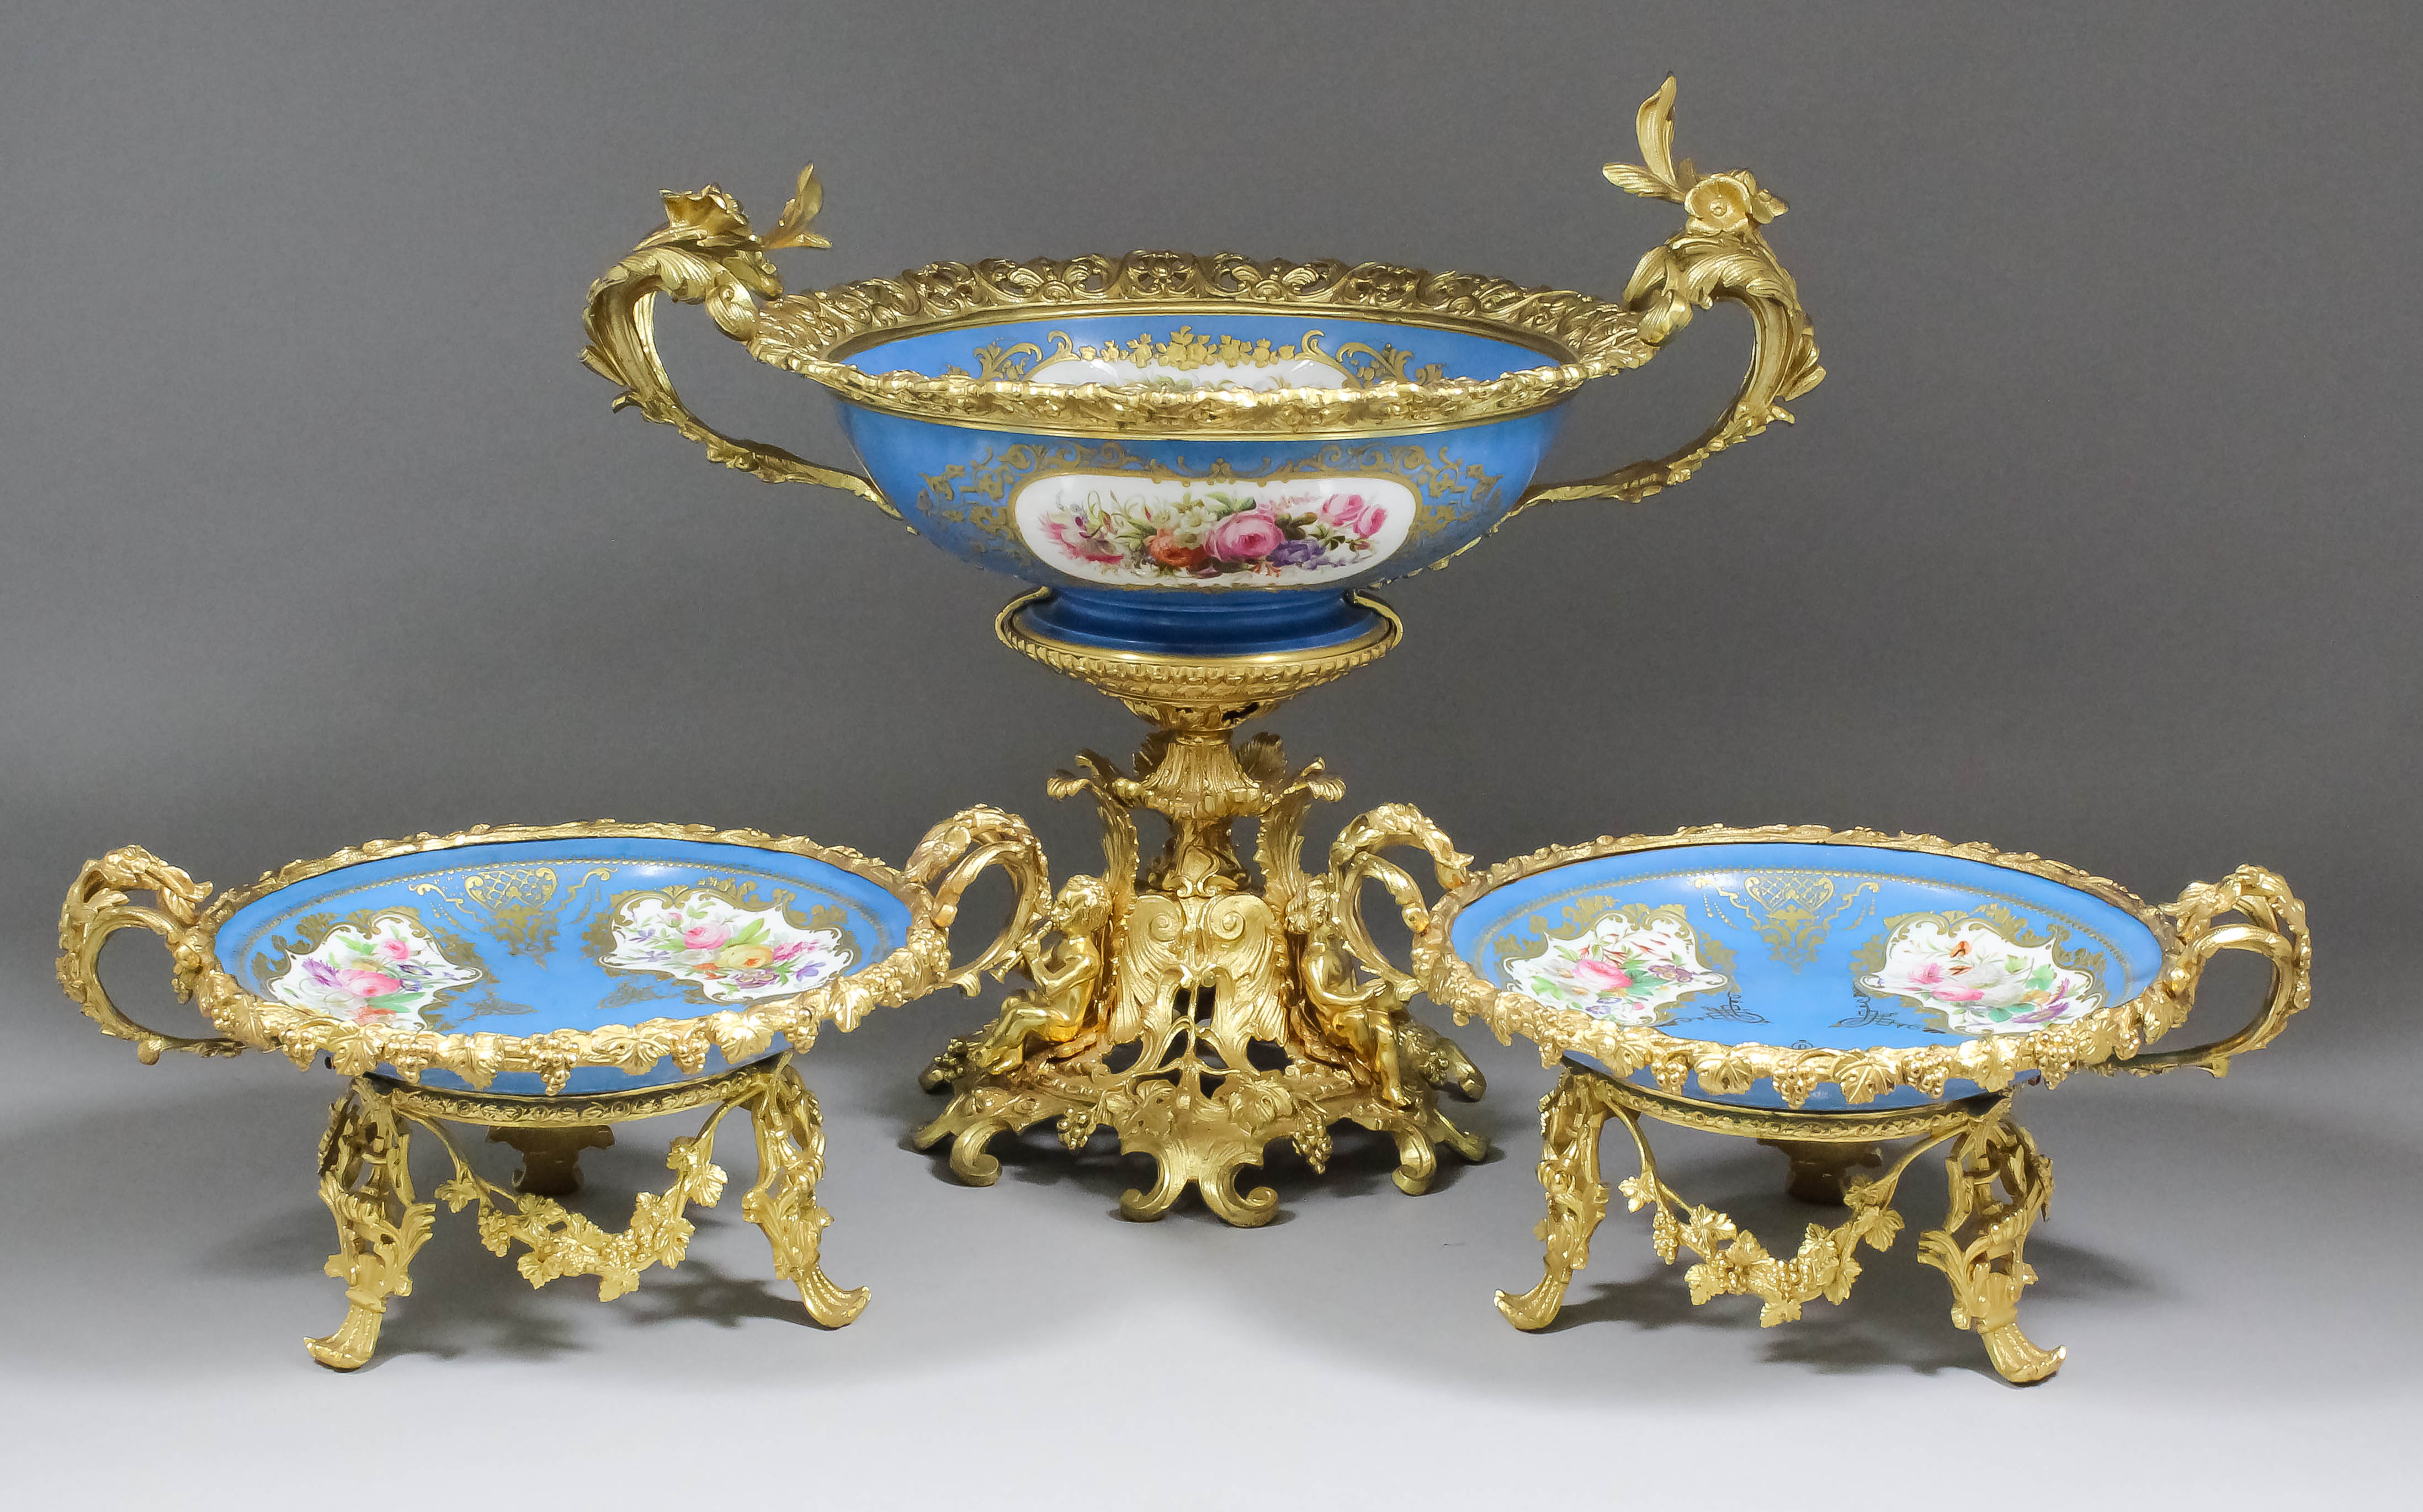 A mid 19th Century Sevres porcelain and gilt metal mounted two-handled tazza painted with flowers in